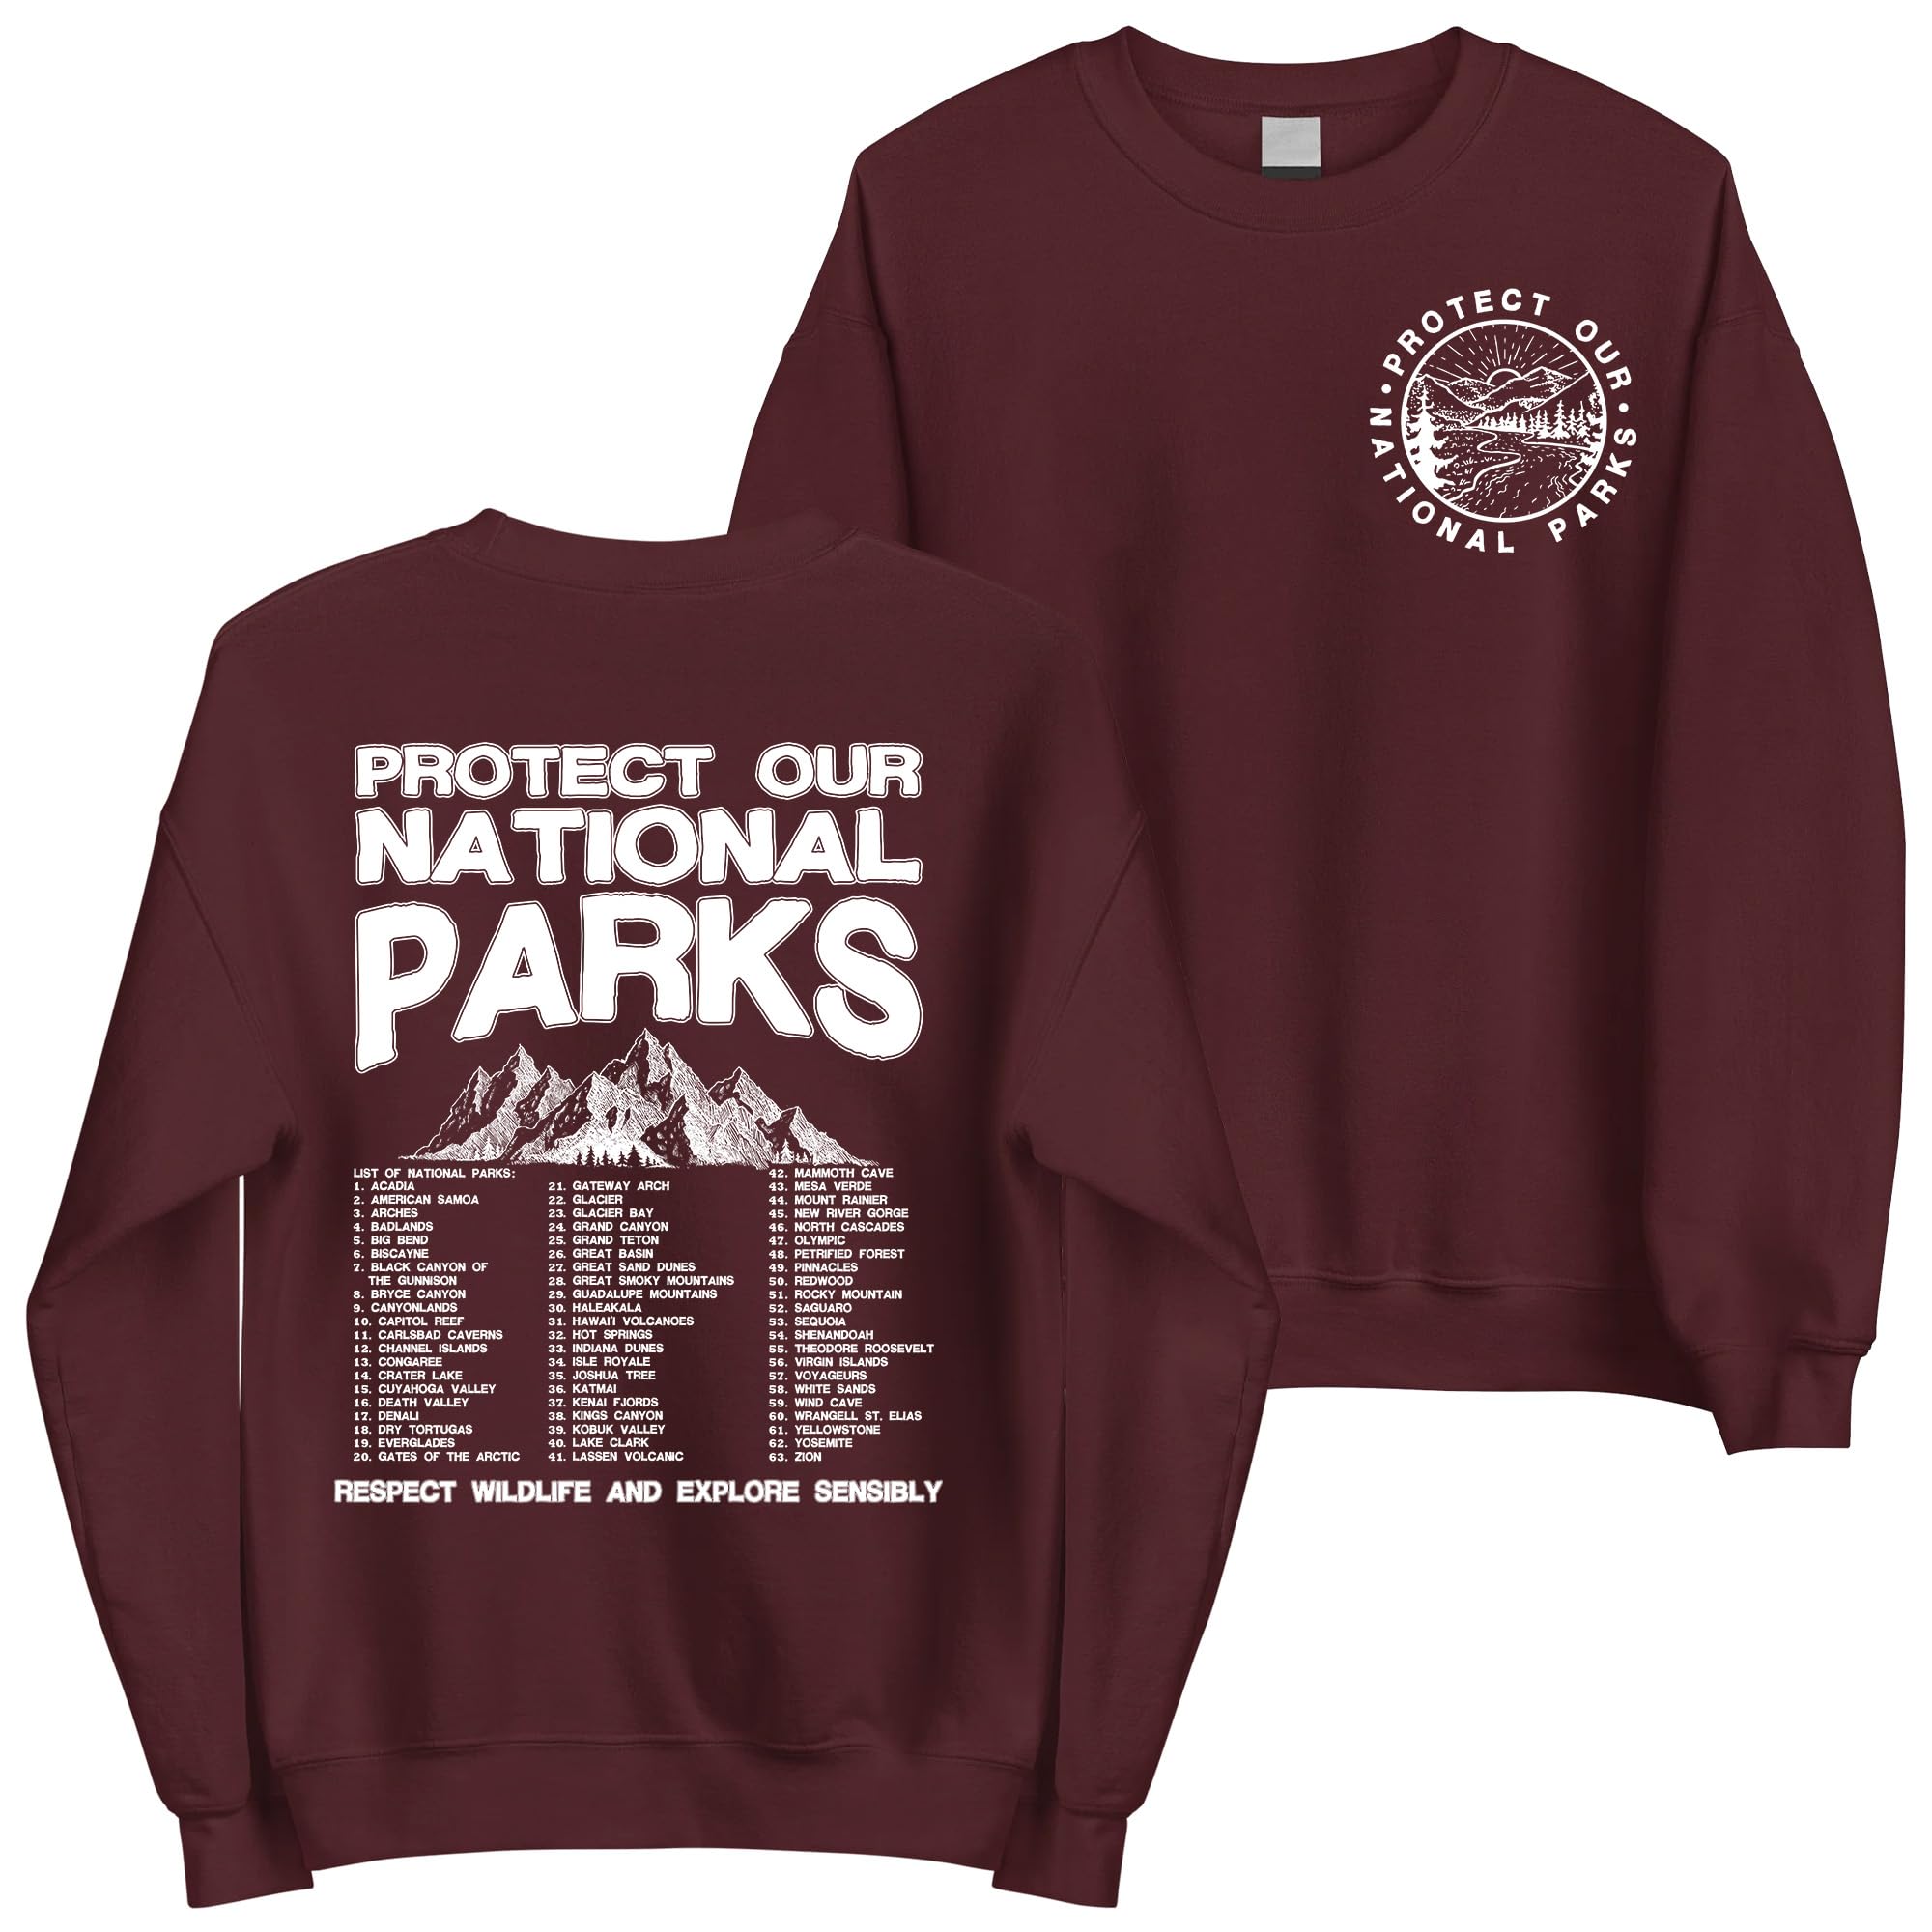 National park sweaters: Embracing Comfort and Style